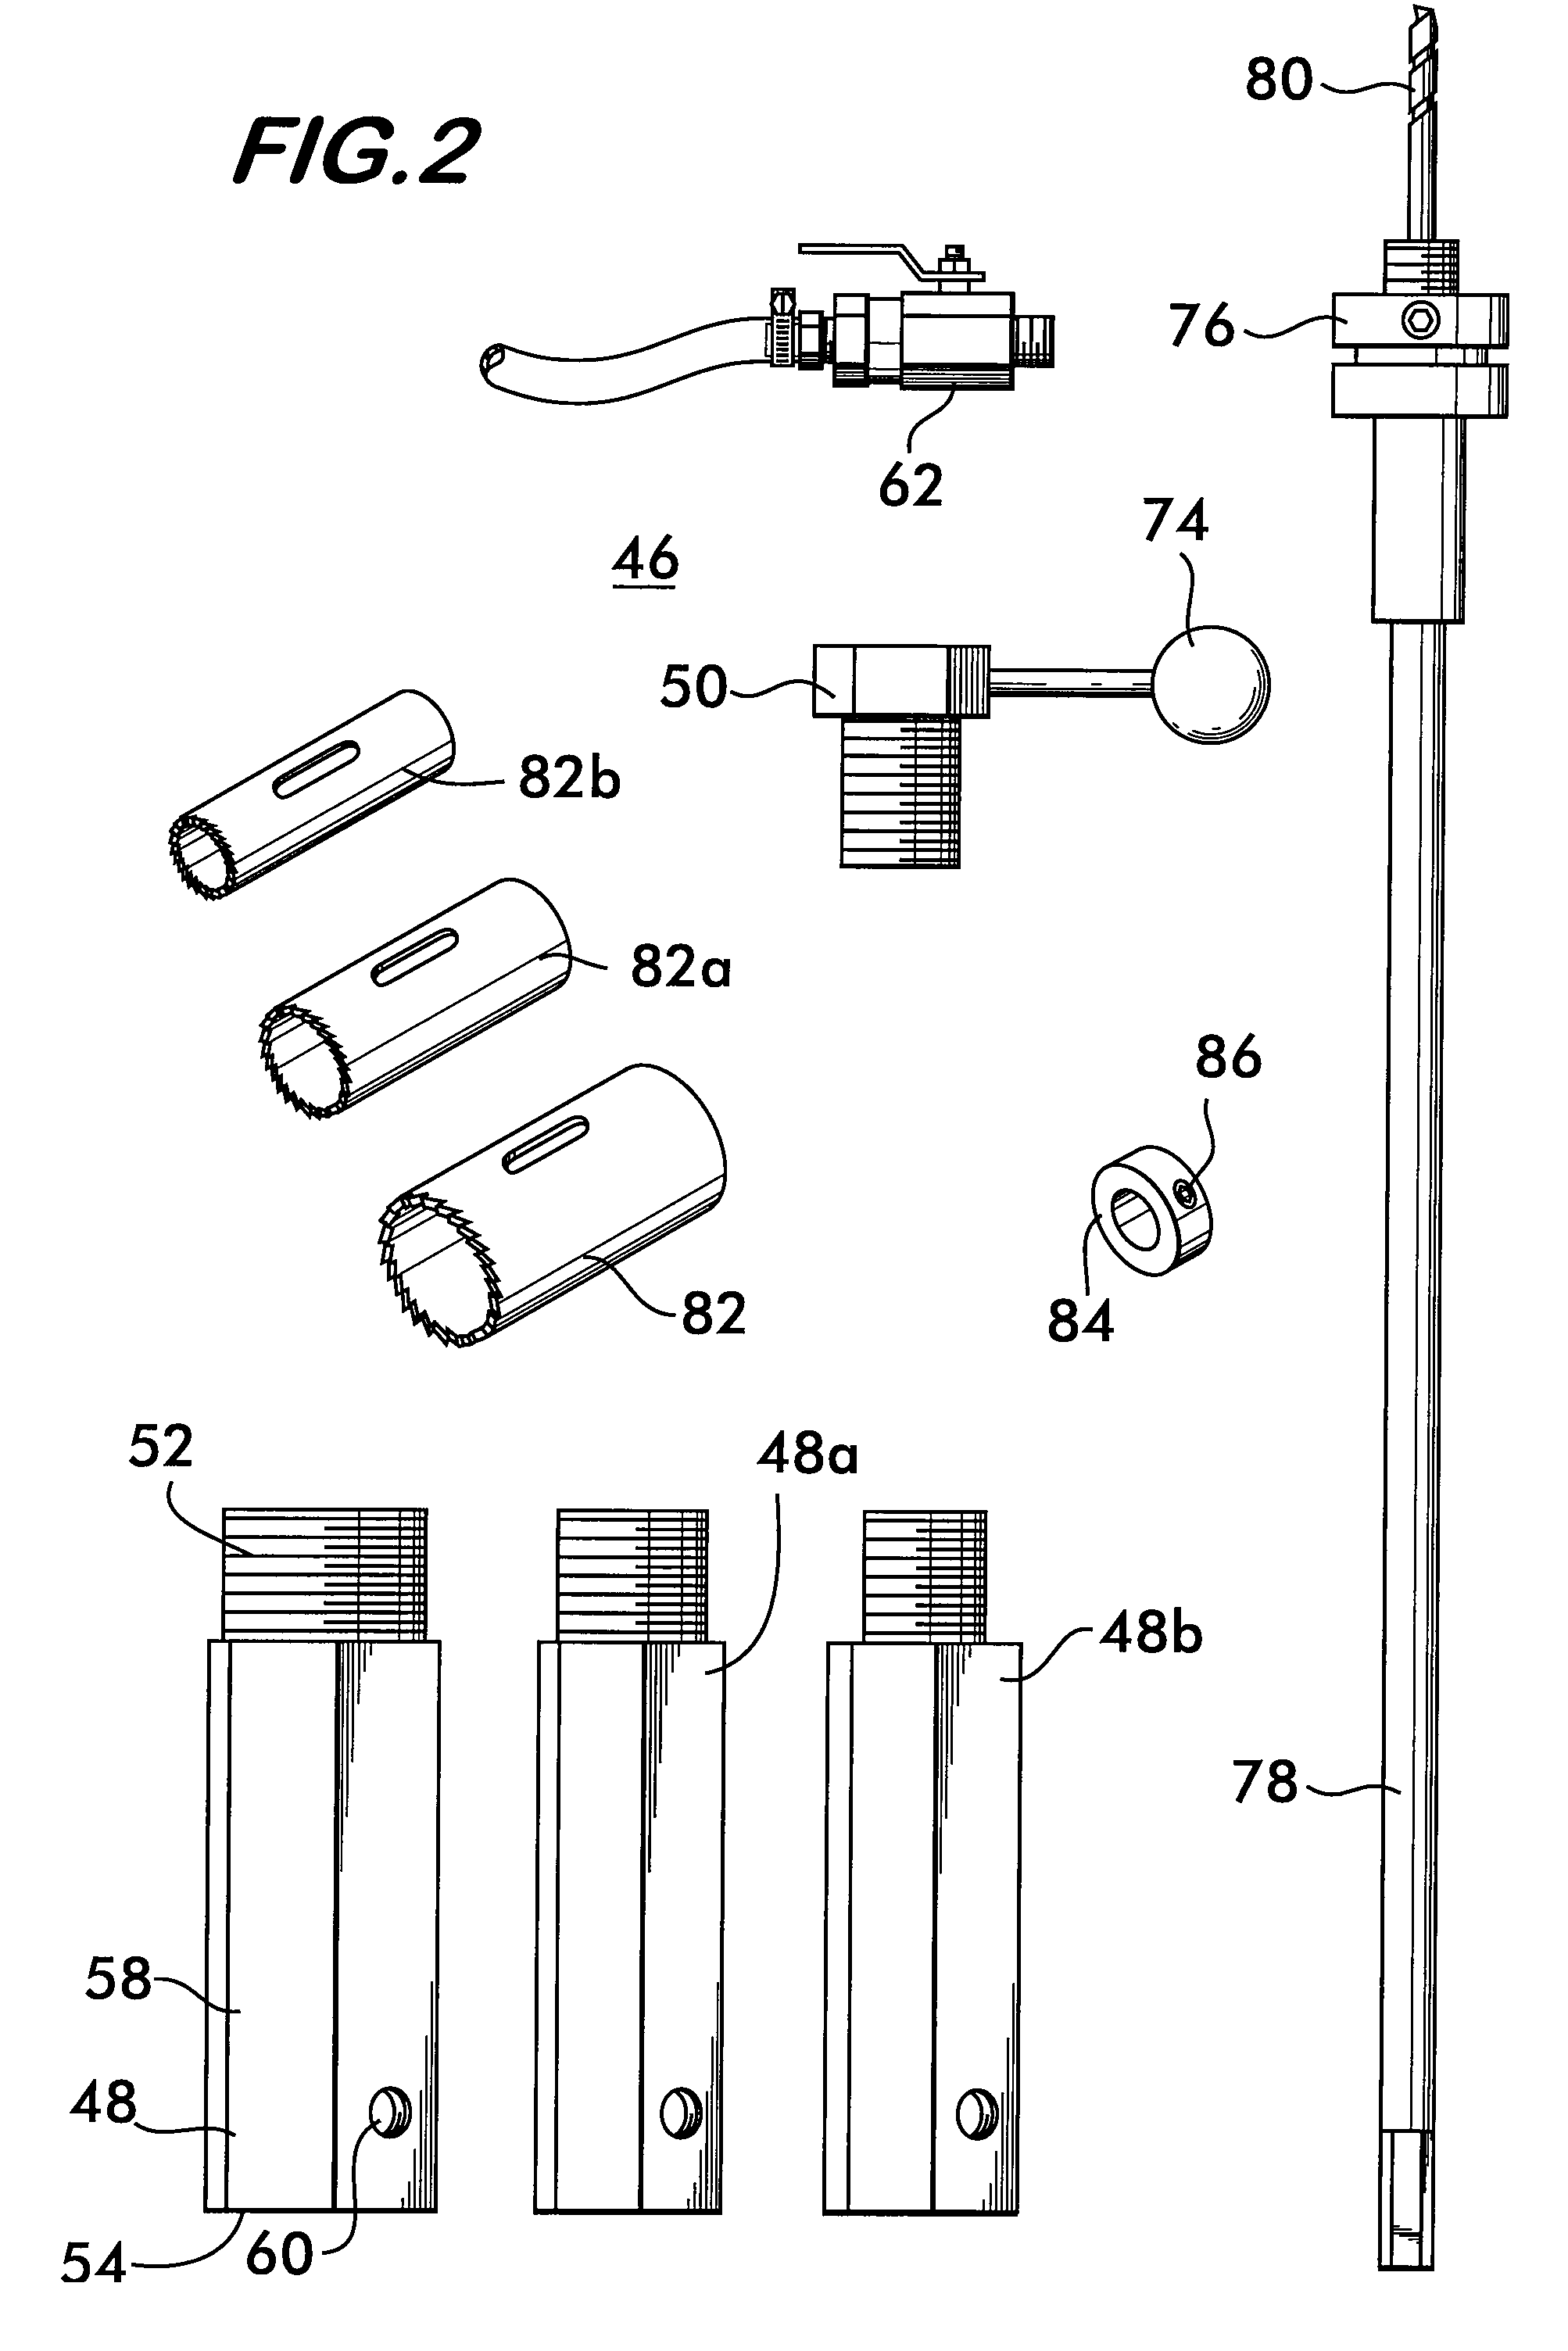 Hot tap device